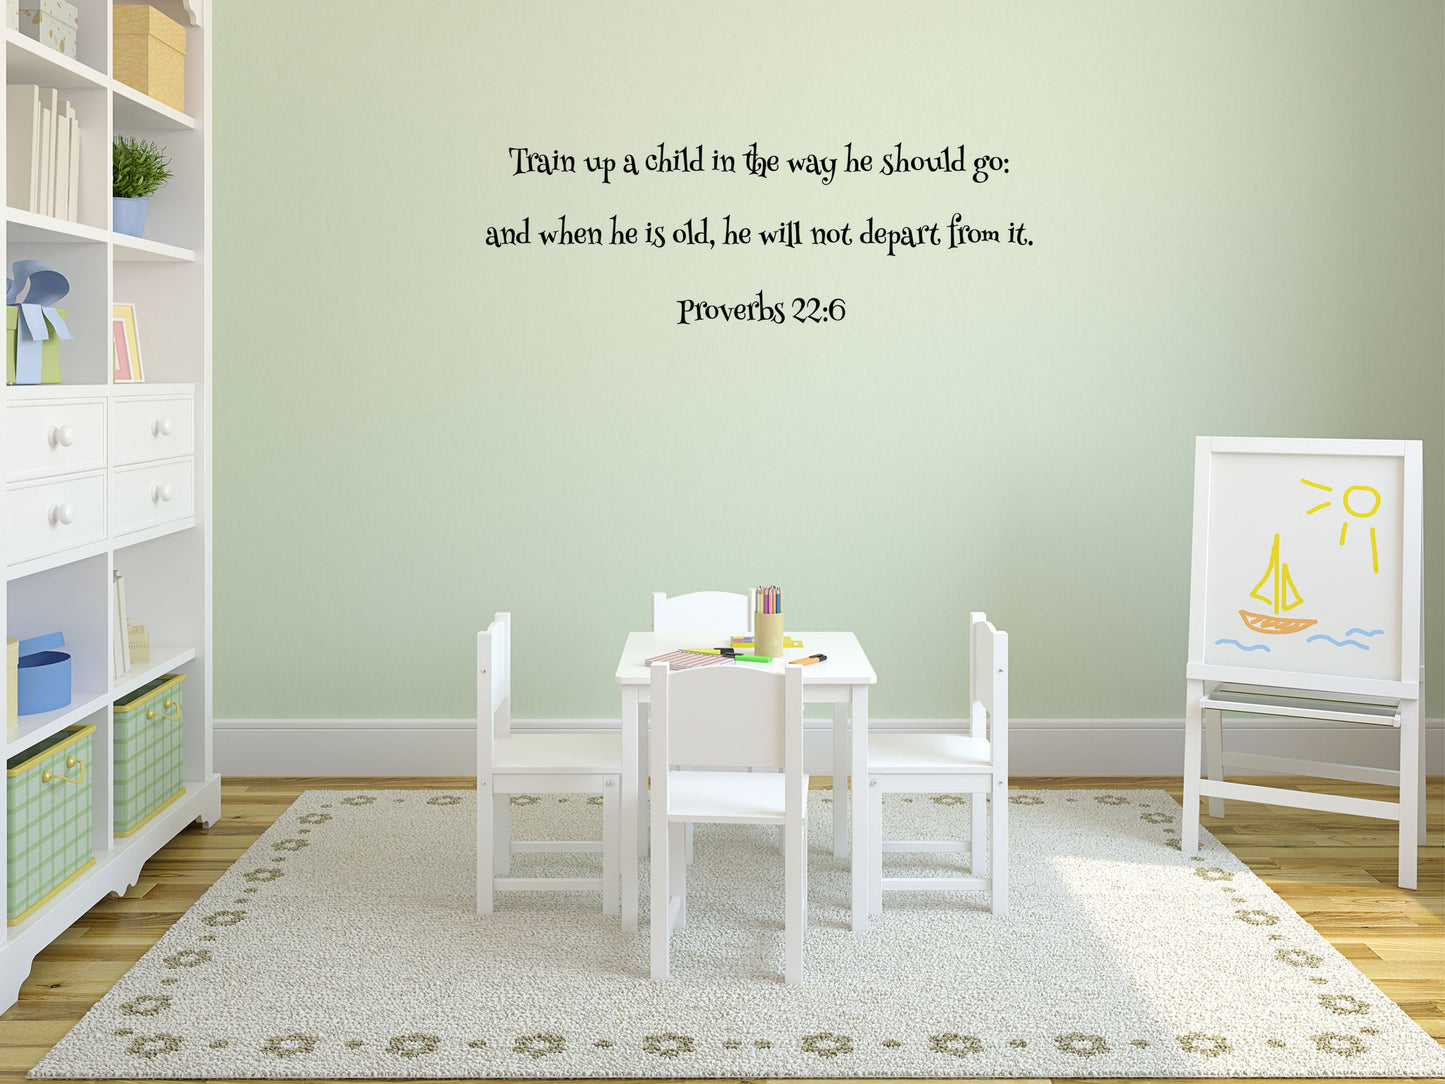 Train up a child Proverbs 22:6 - Christian Bible Scripture Wall Decal Church Quote Vinyl Wall Decal Inspirational Wall Signs 